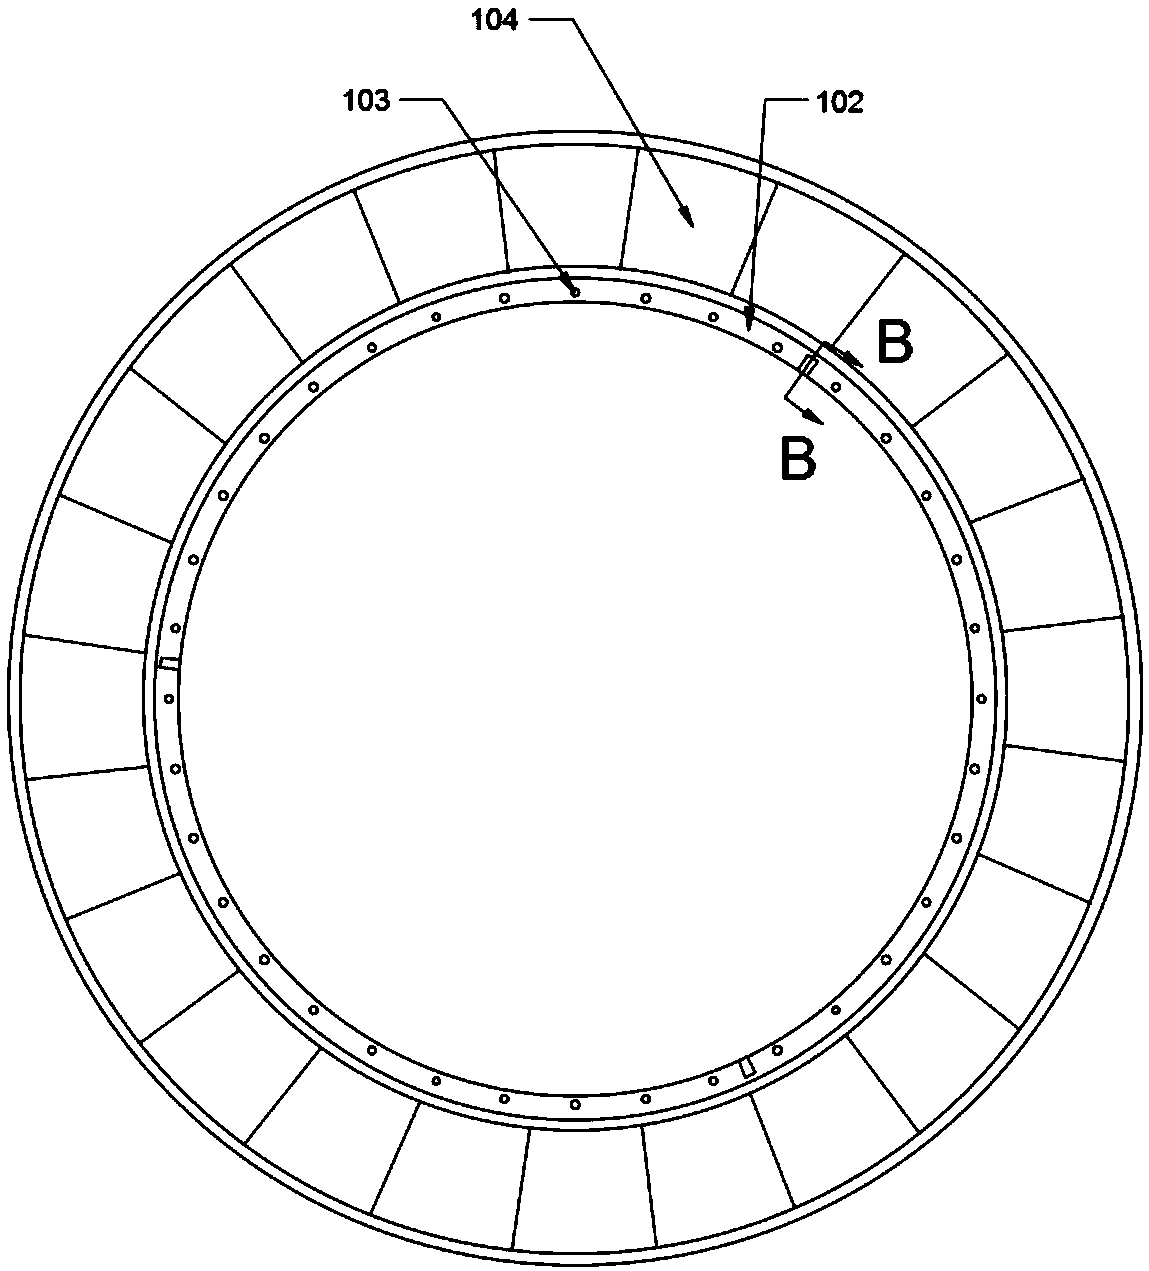 Fish mouth sealing structure between turbine rotor and stator of gas turbine